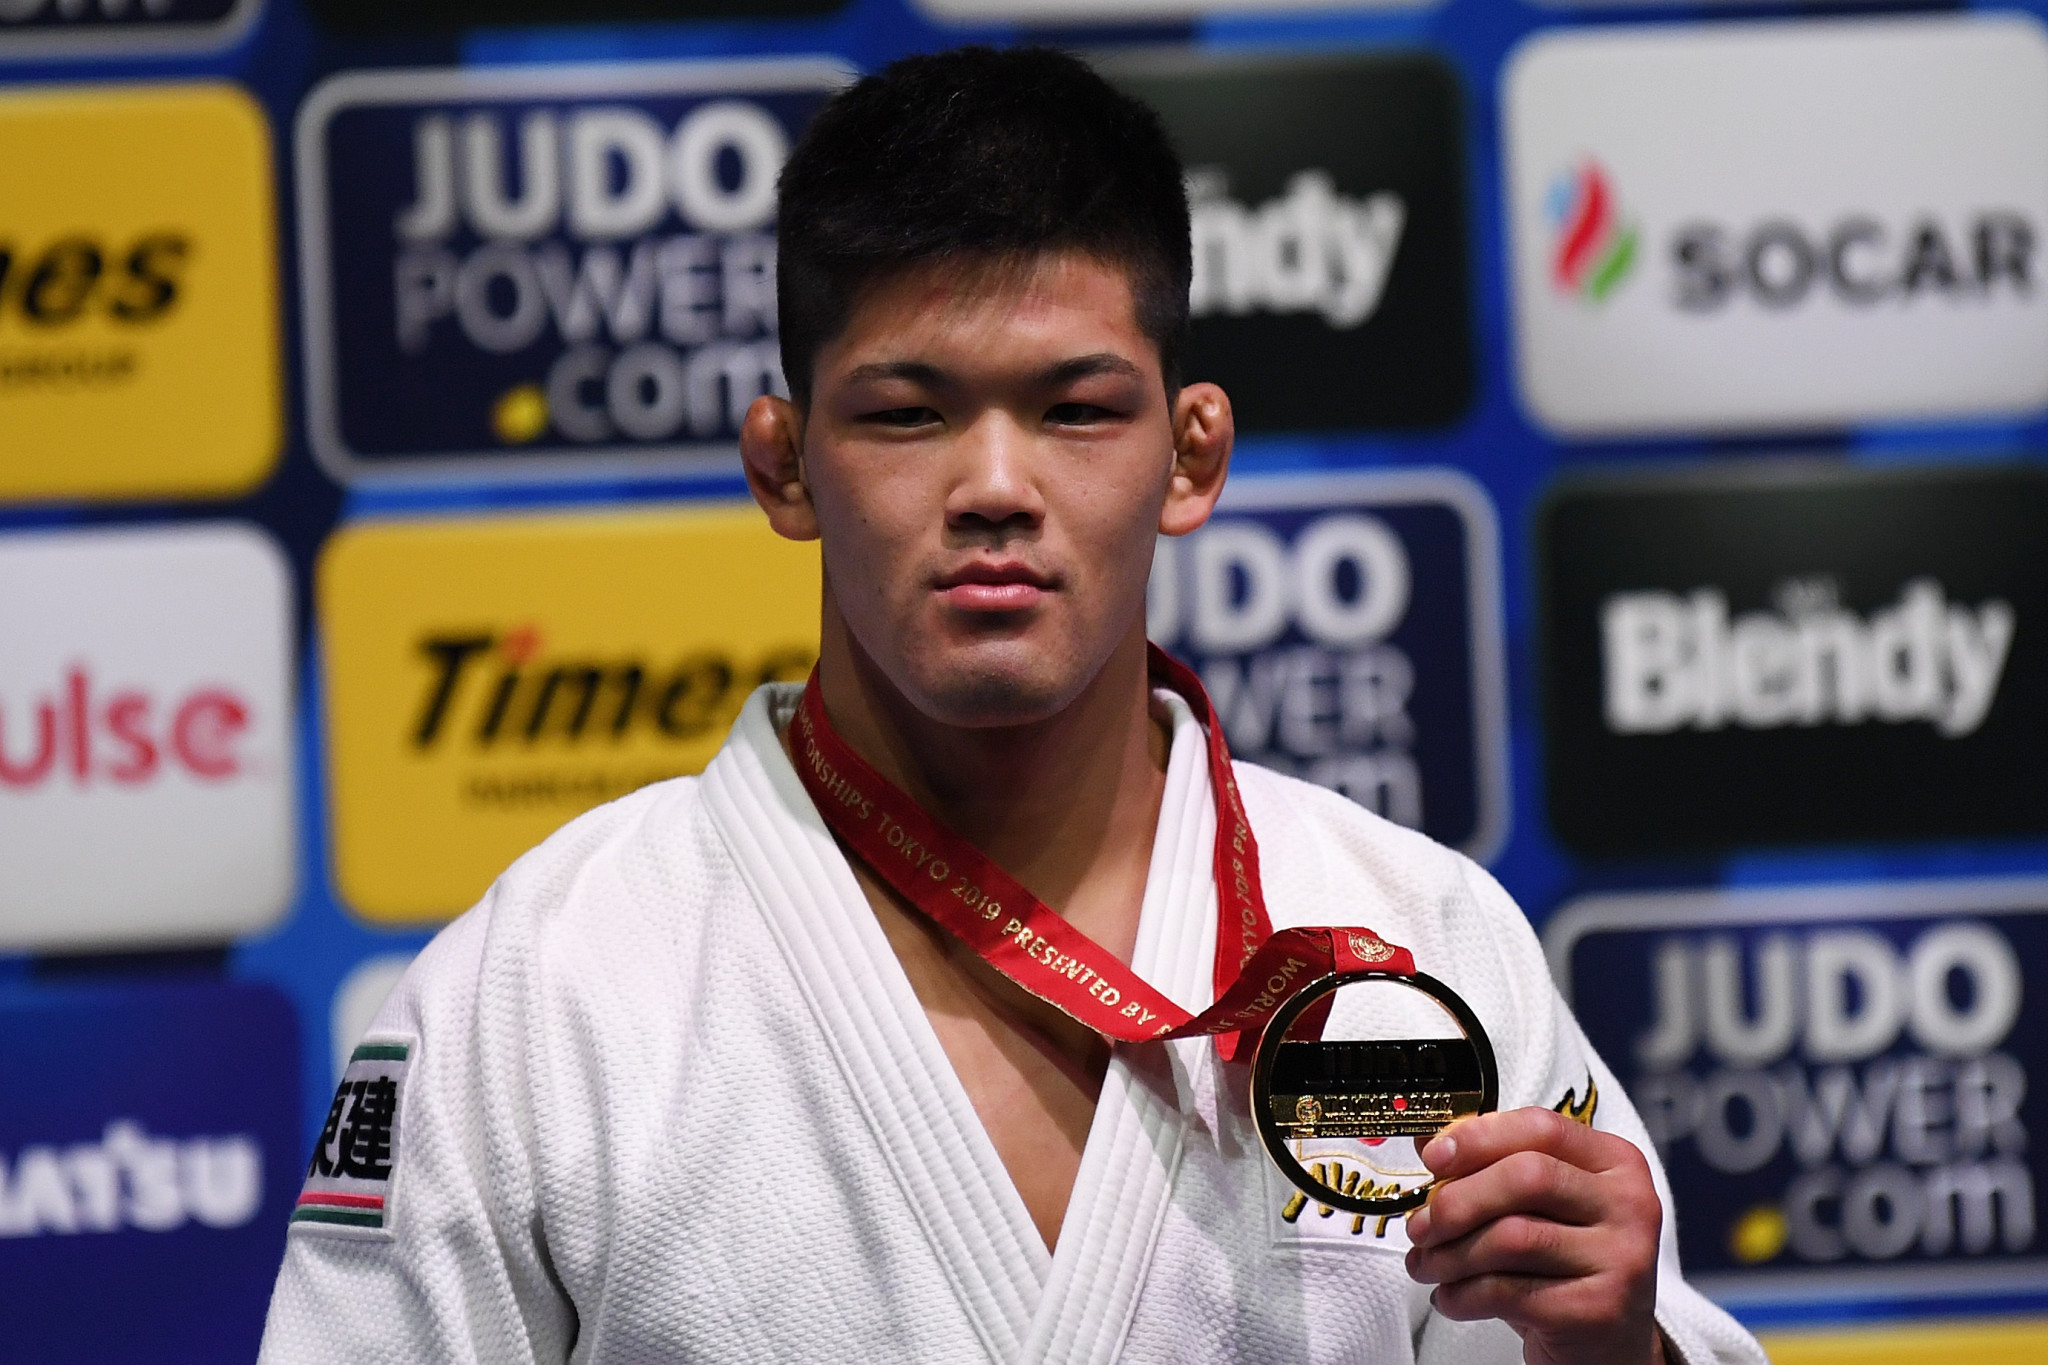 Ono returns to IJF World Championships with third gold, as Deguchi earns homecoming victory